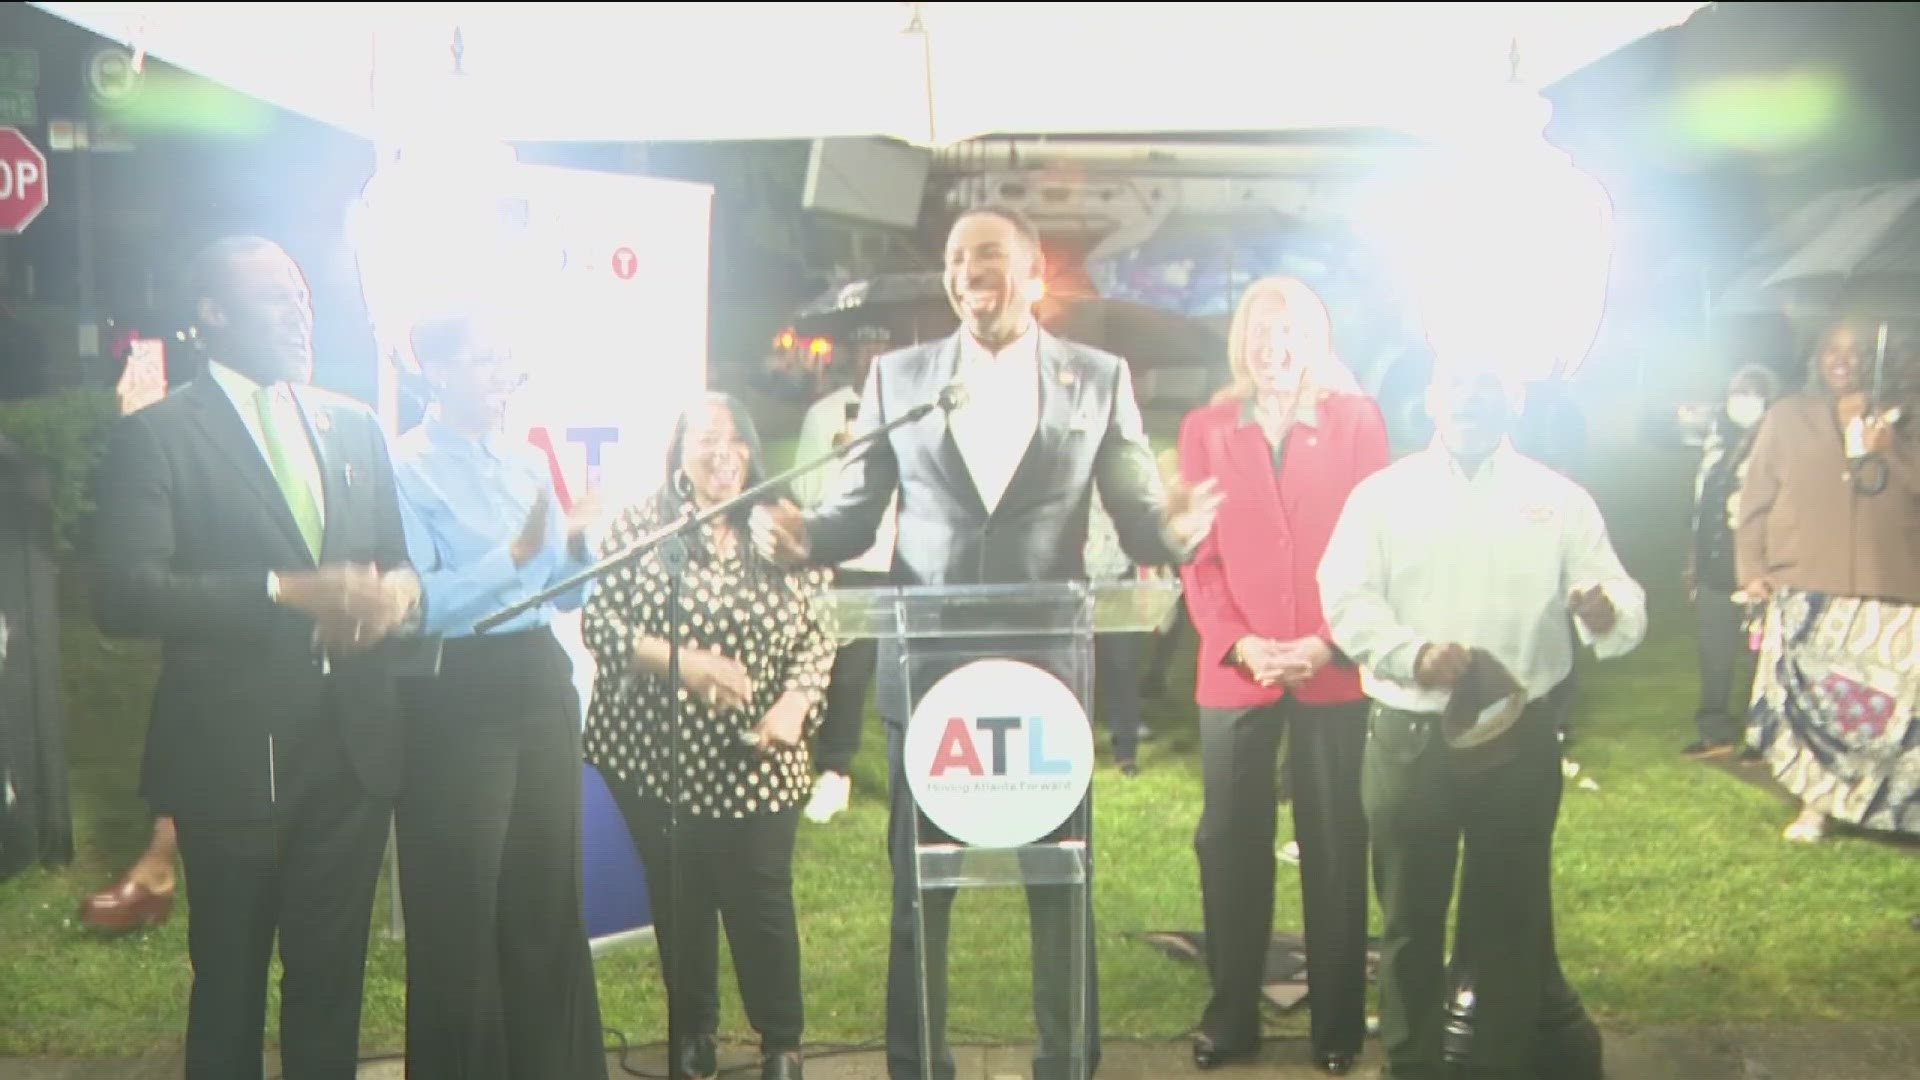 A project called "Light Up The Night" started in the Old Adamsville neighborhood.